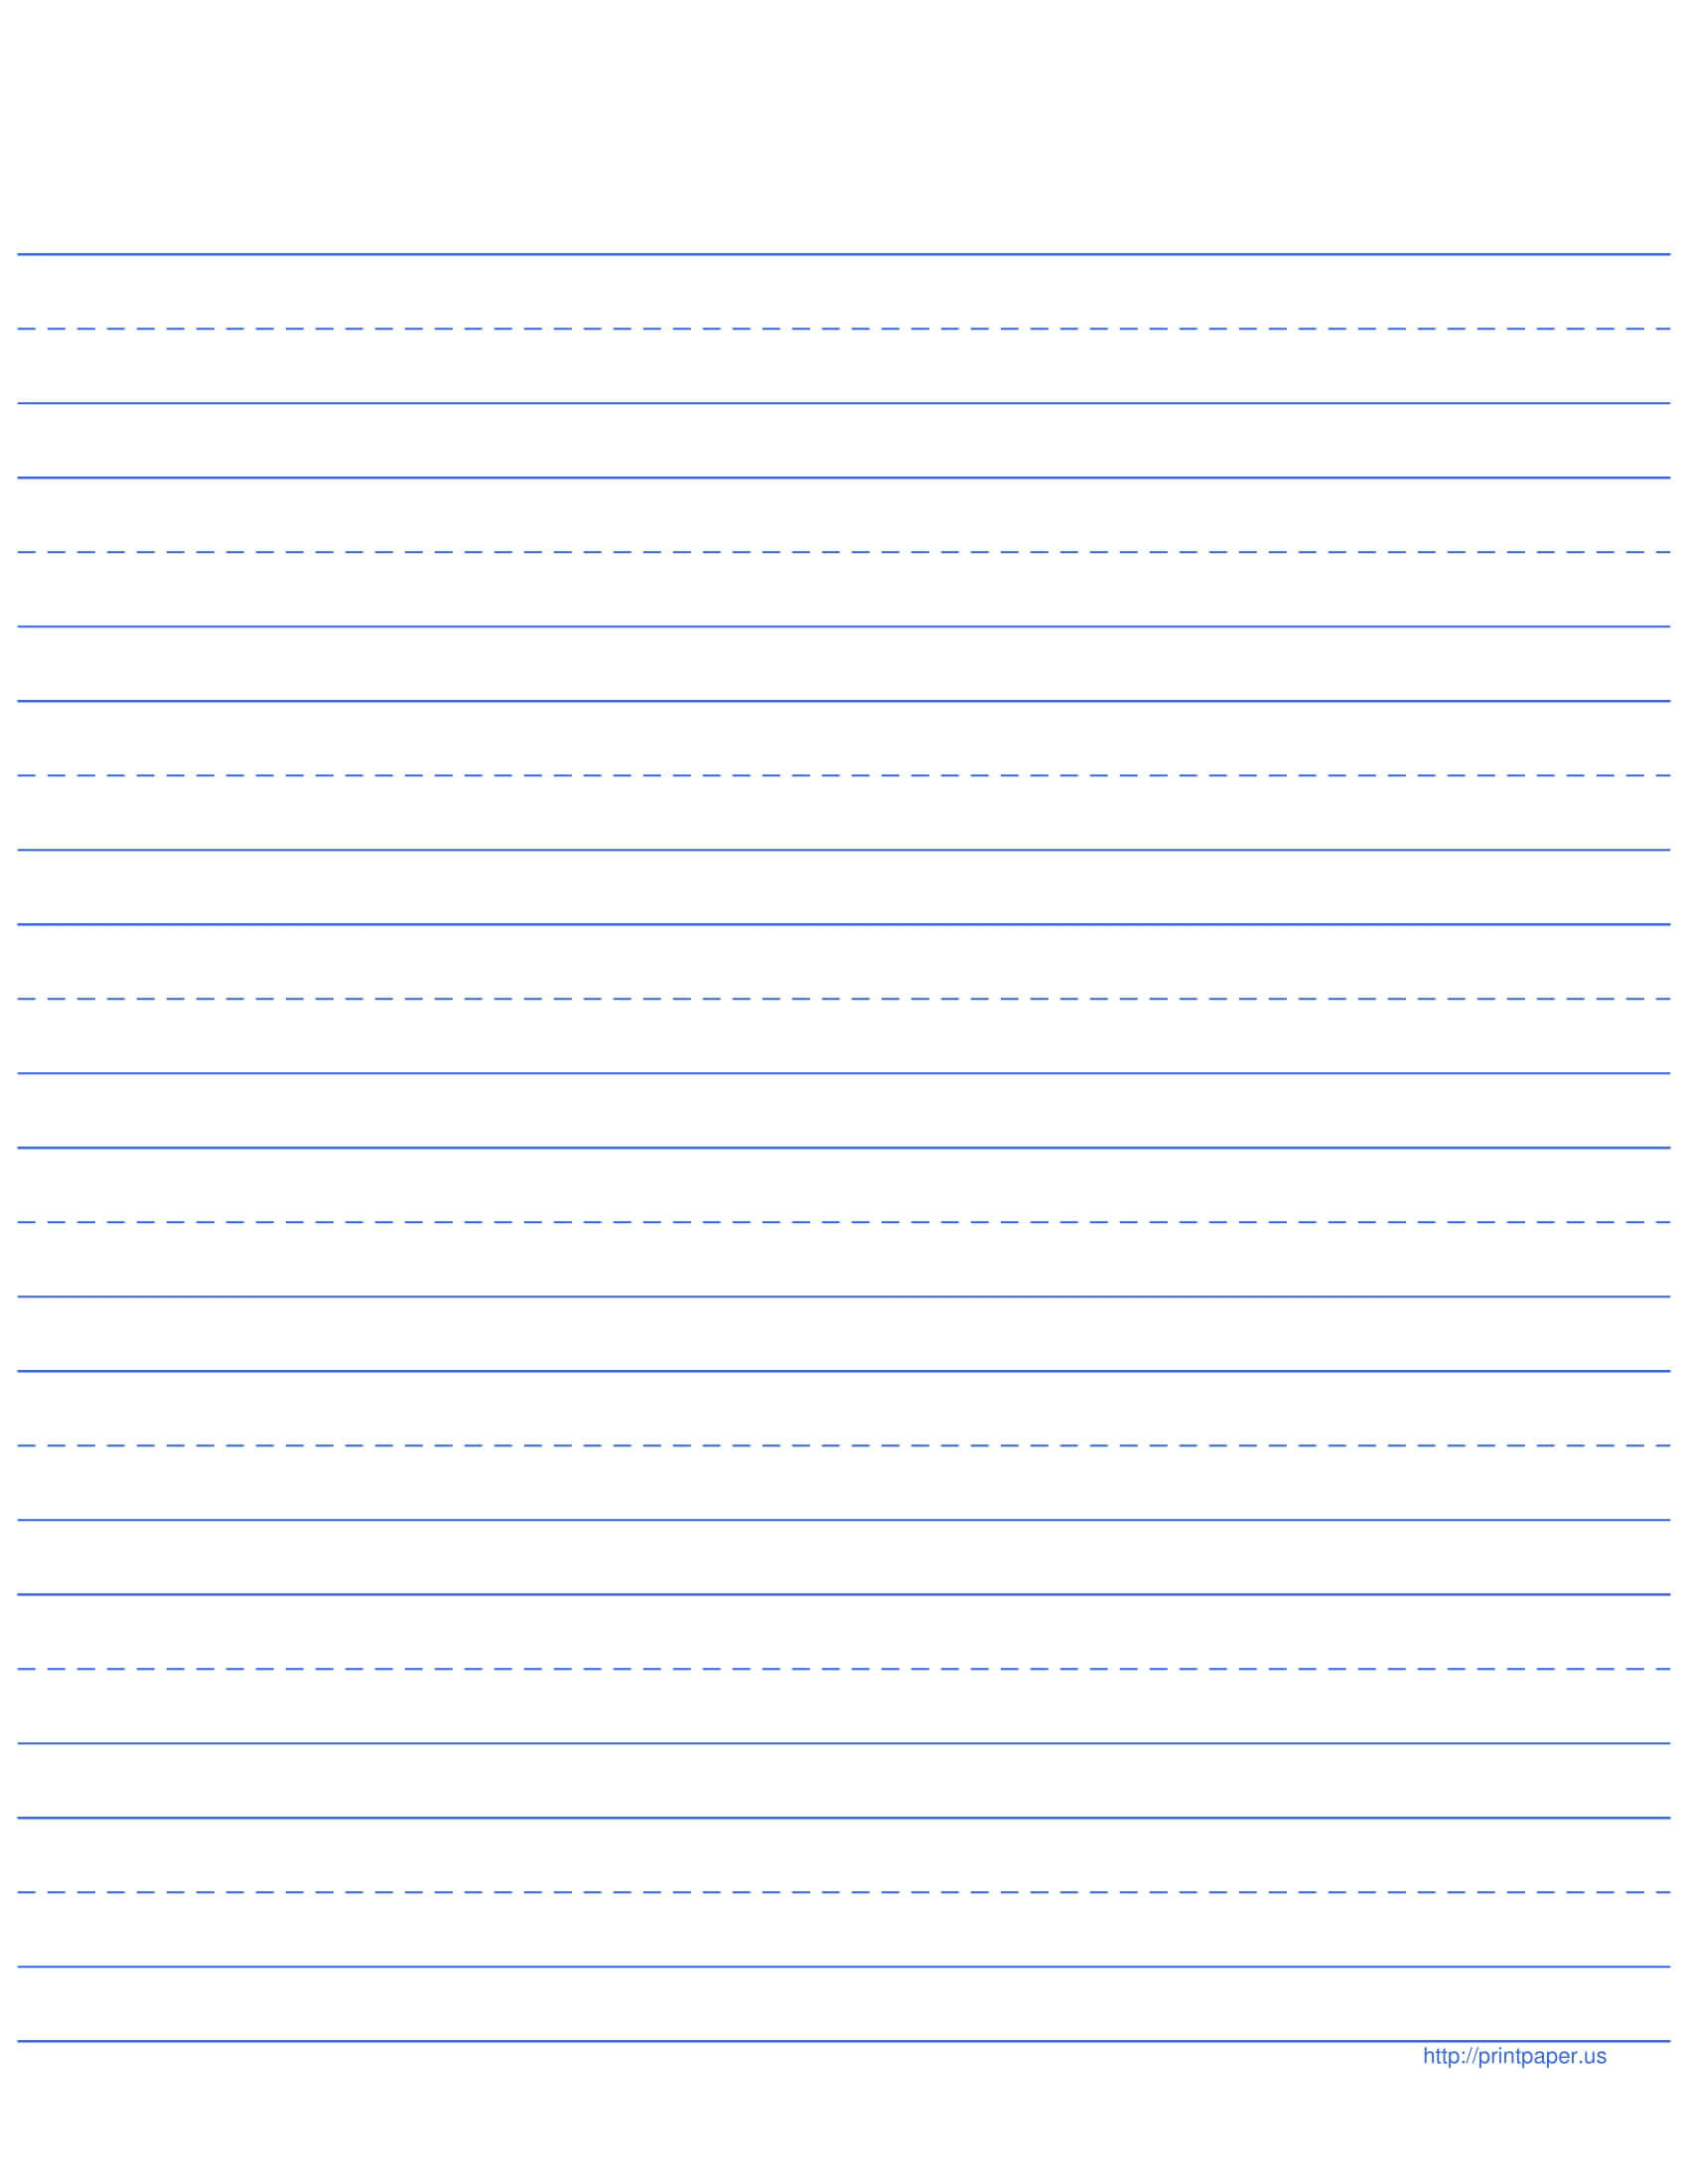 11+ Lined Paper Templates – Pdf | Free & Premium Templates With Regard To Ruled Paper Template Word